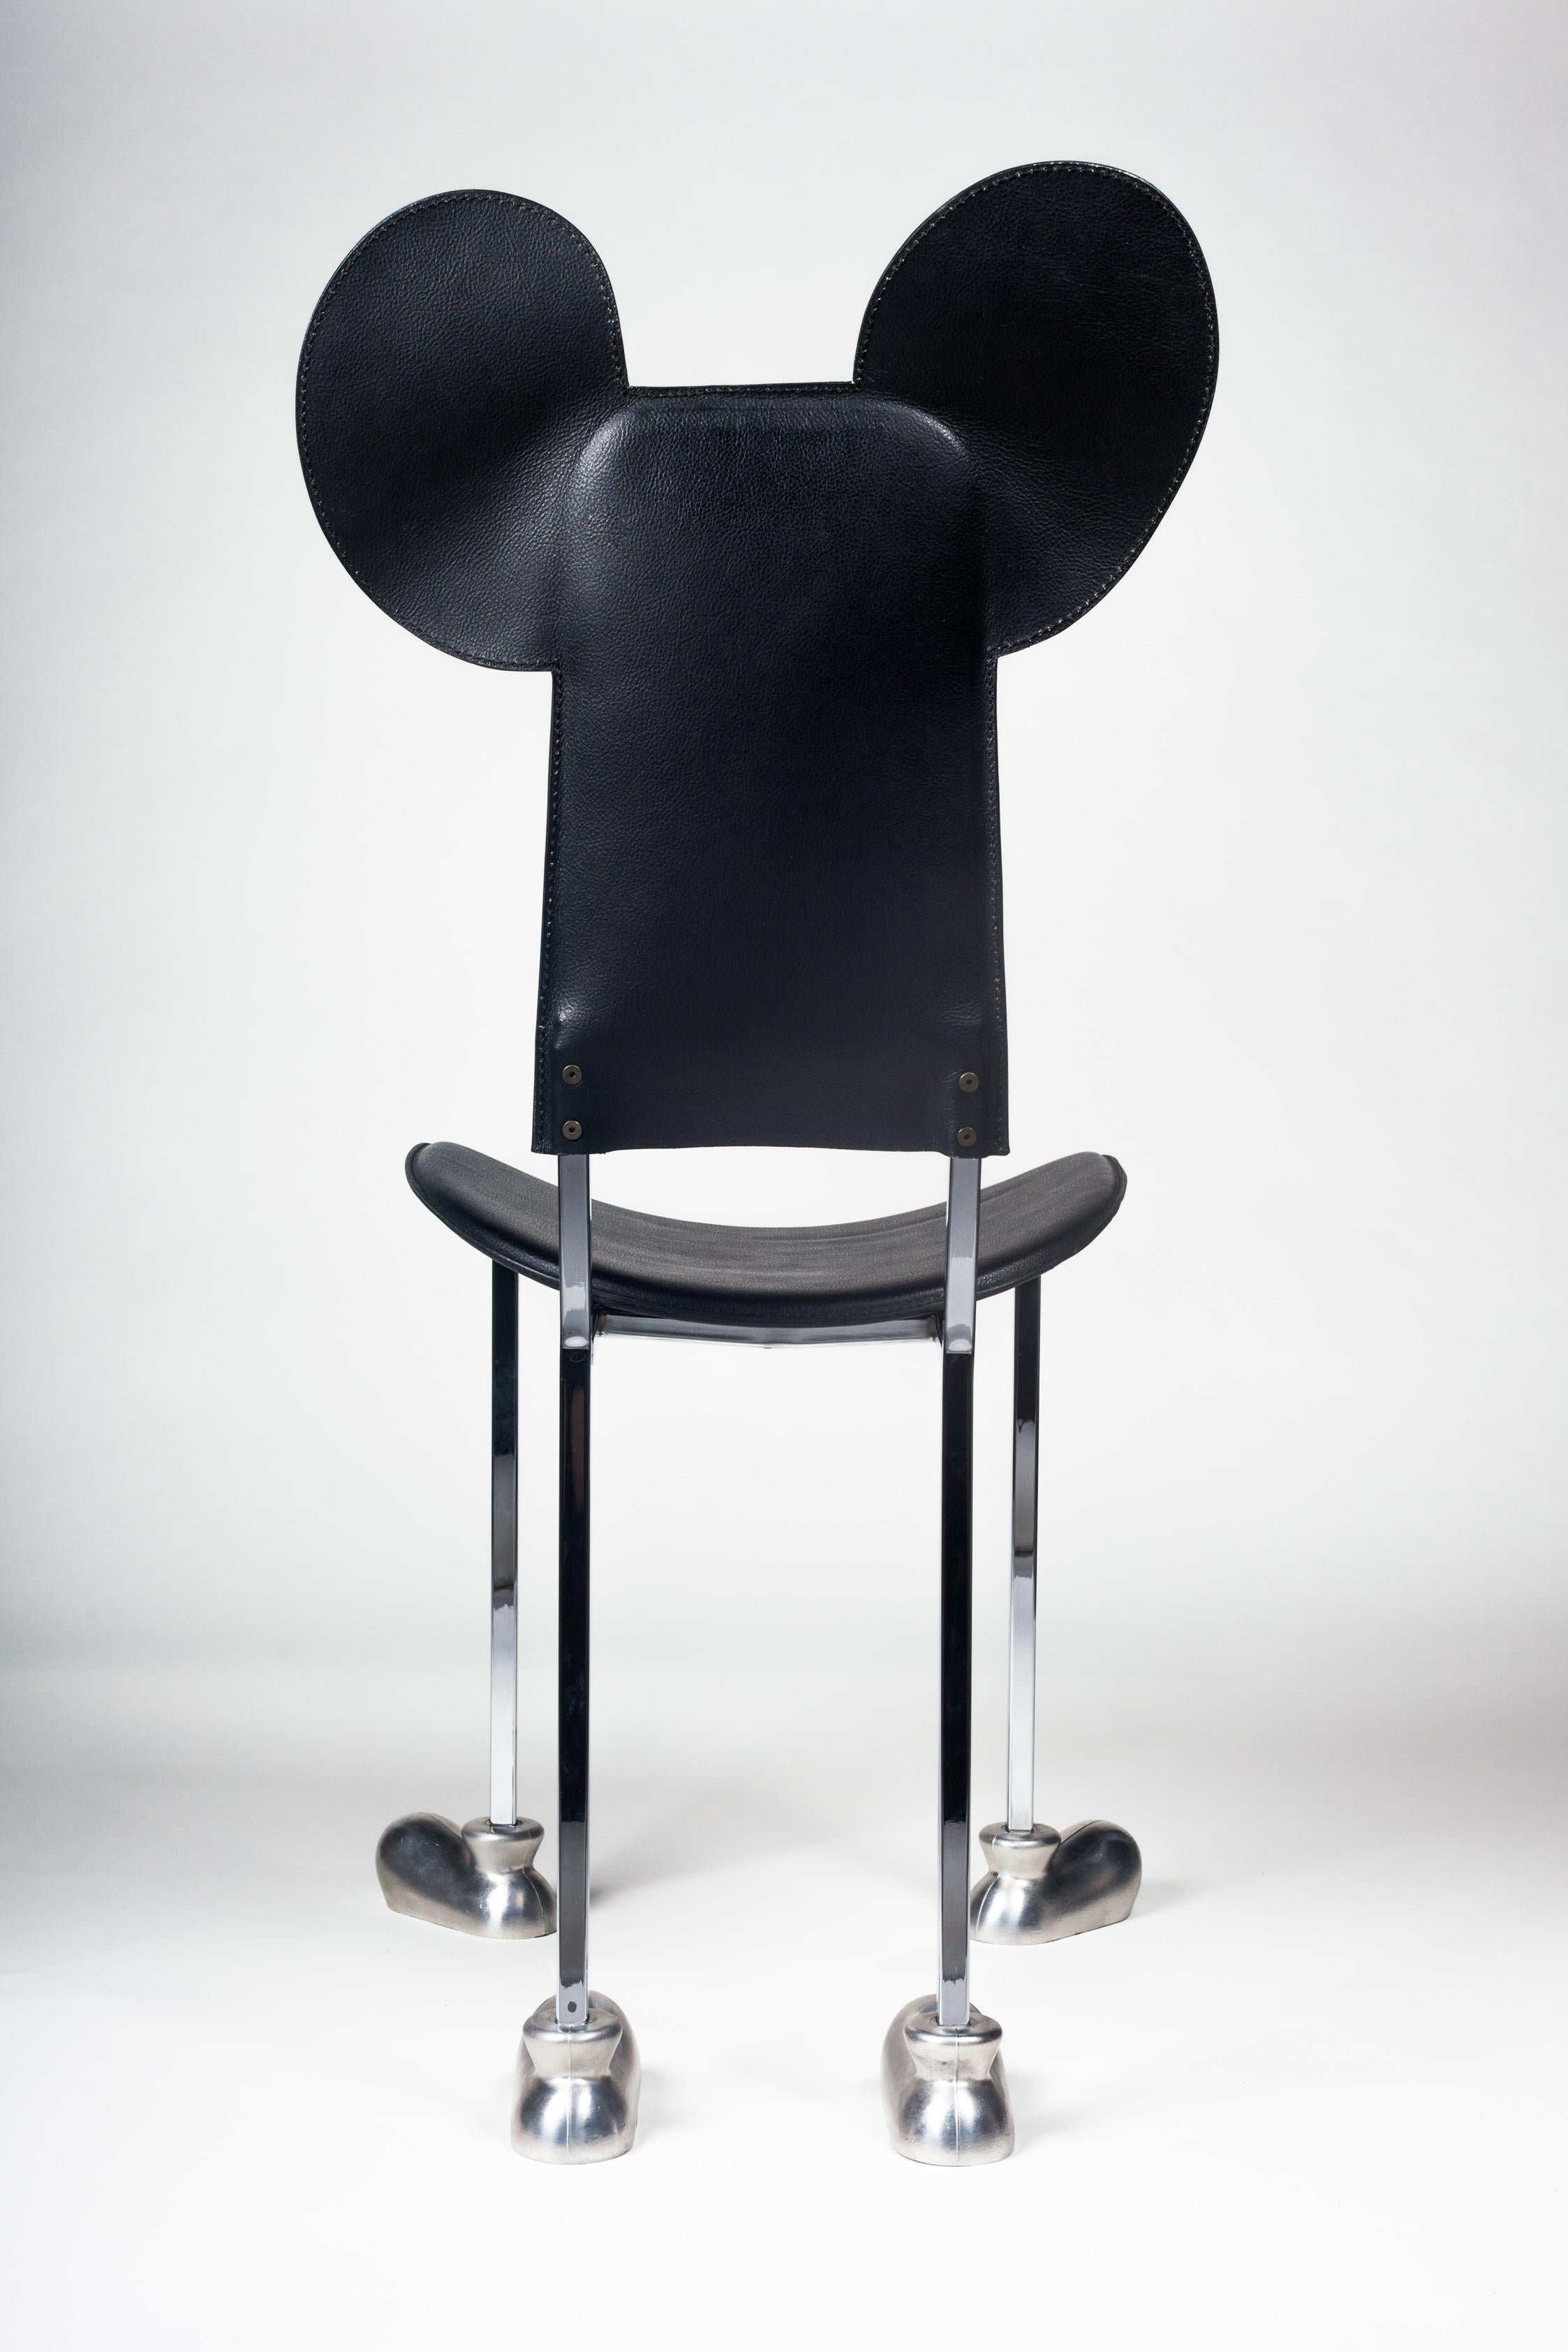 Memphis Mickey Mouse Chair by Javier Mariscal, 